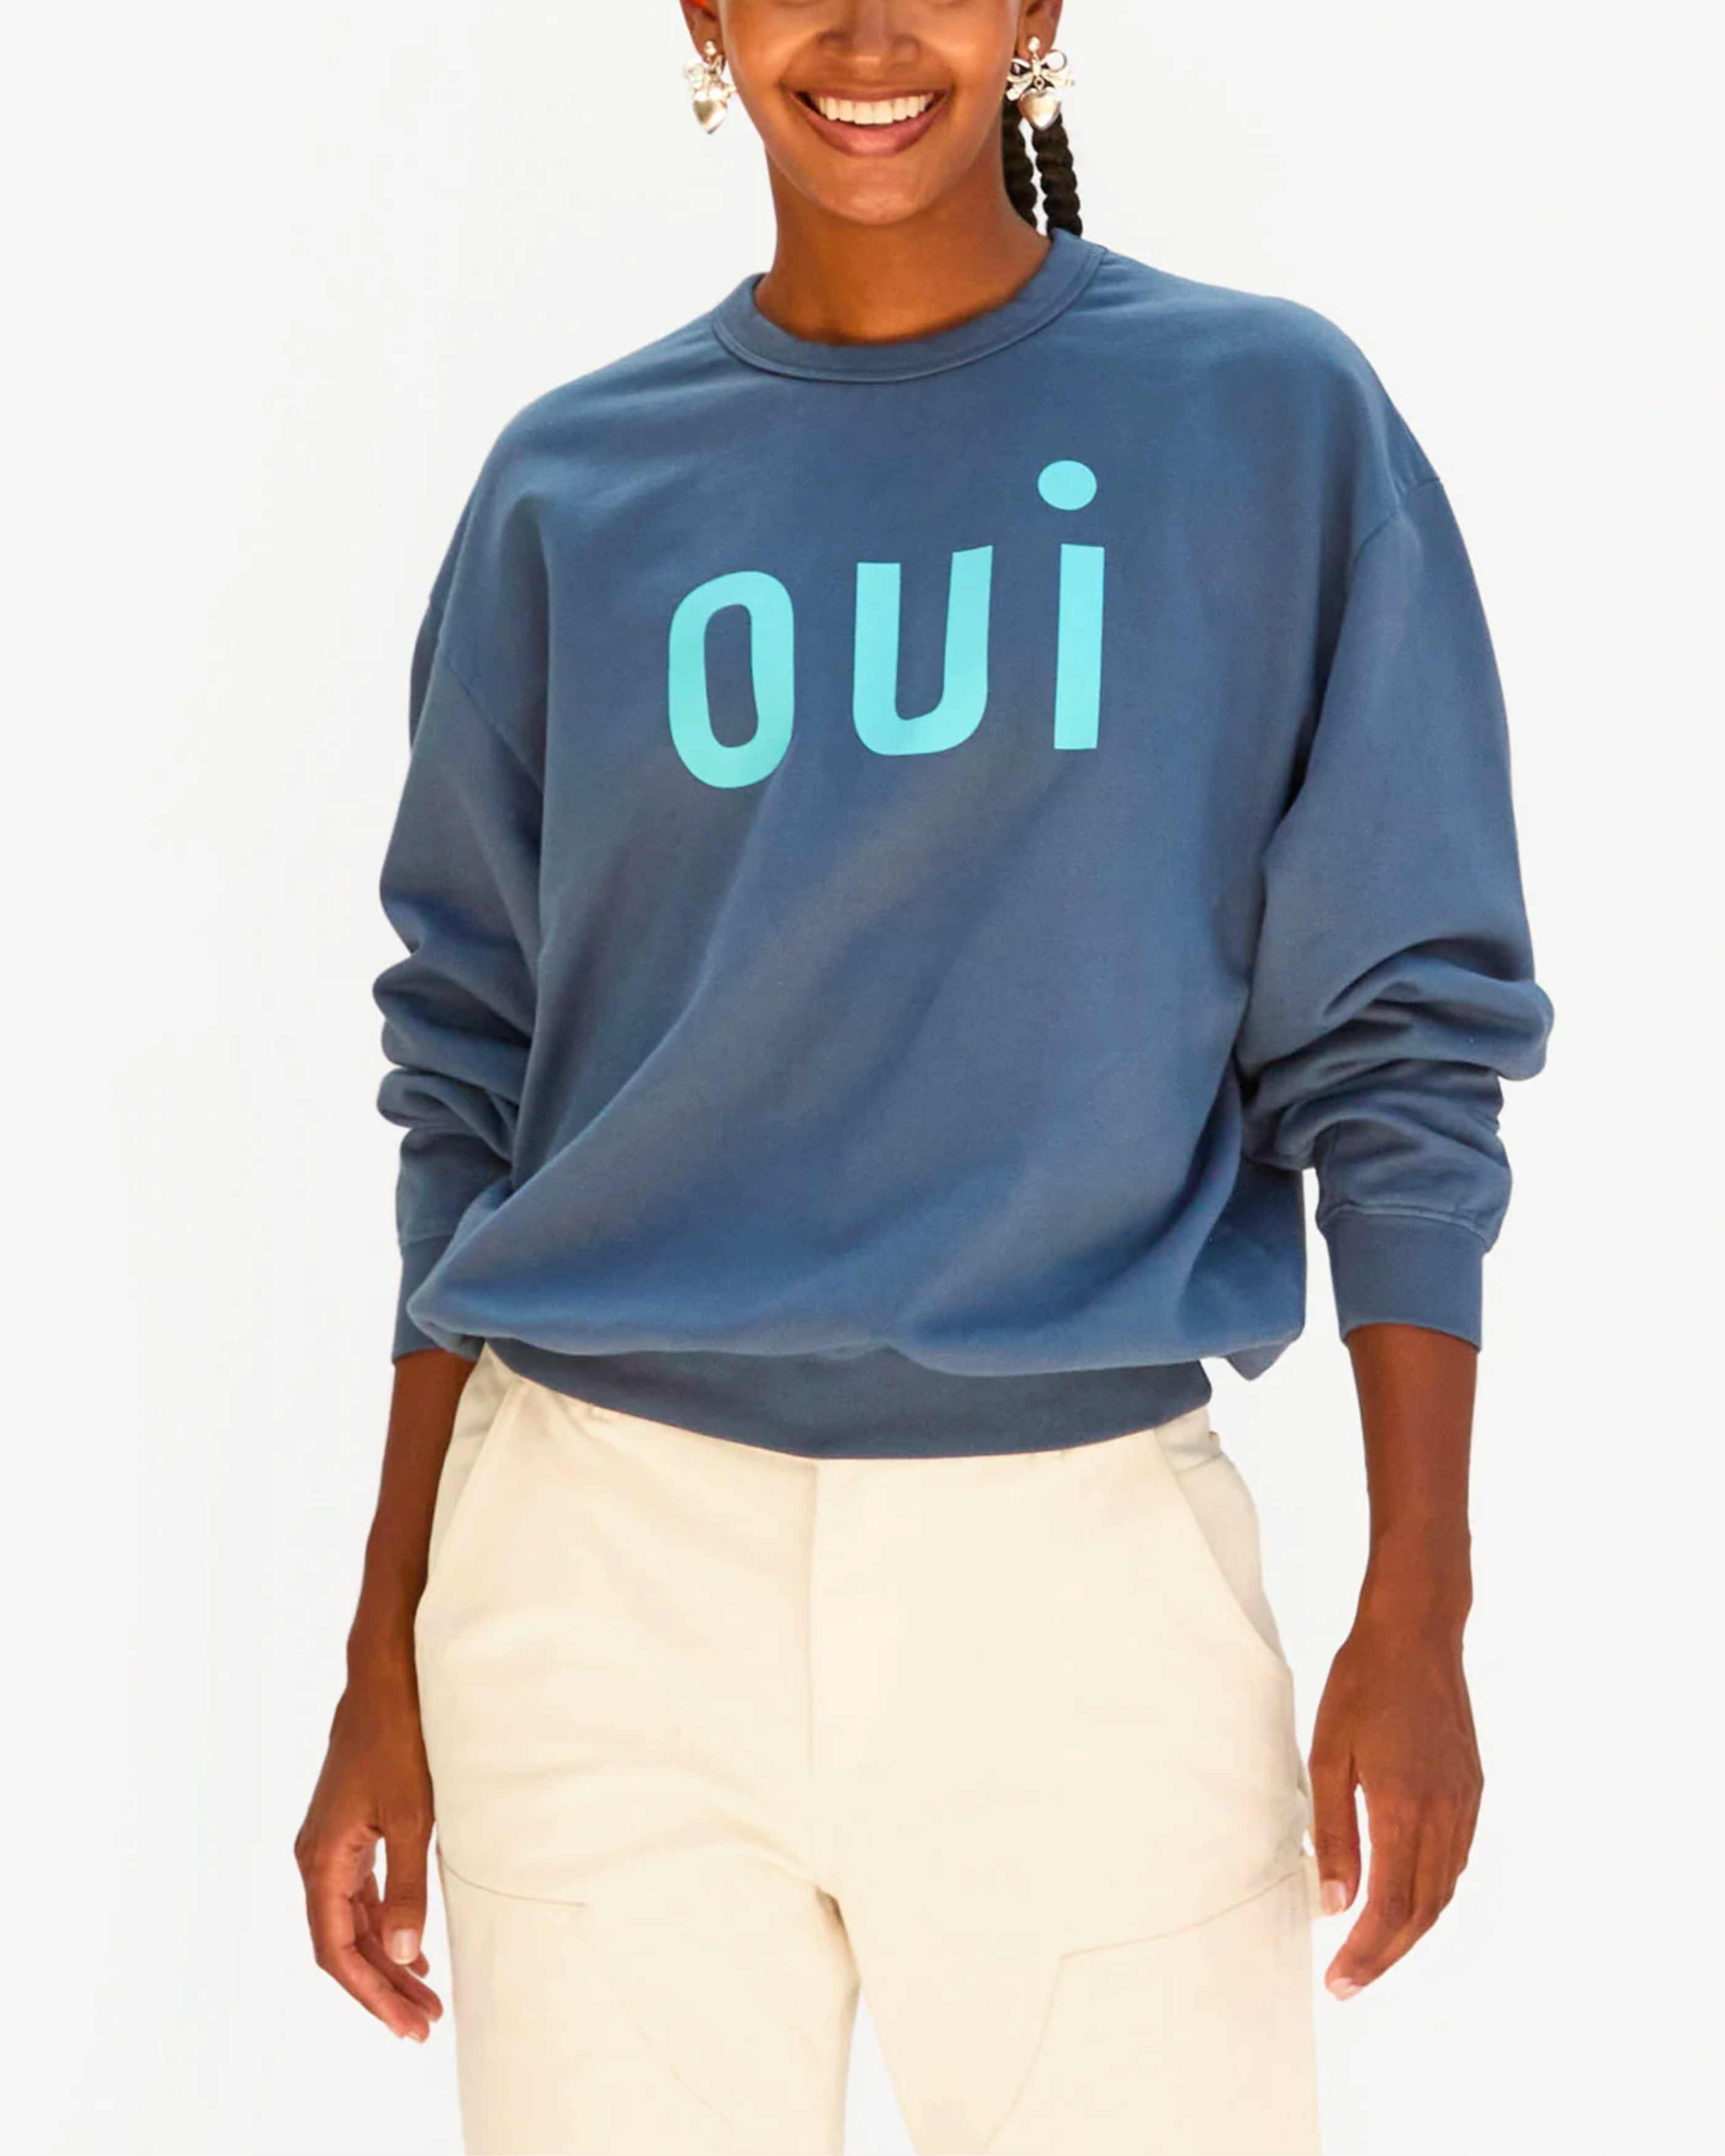 Clare V. Oversized Sweatshirt in Faded Navy and Light Blue